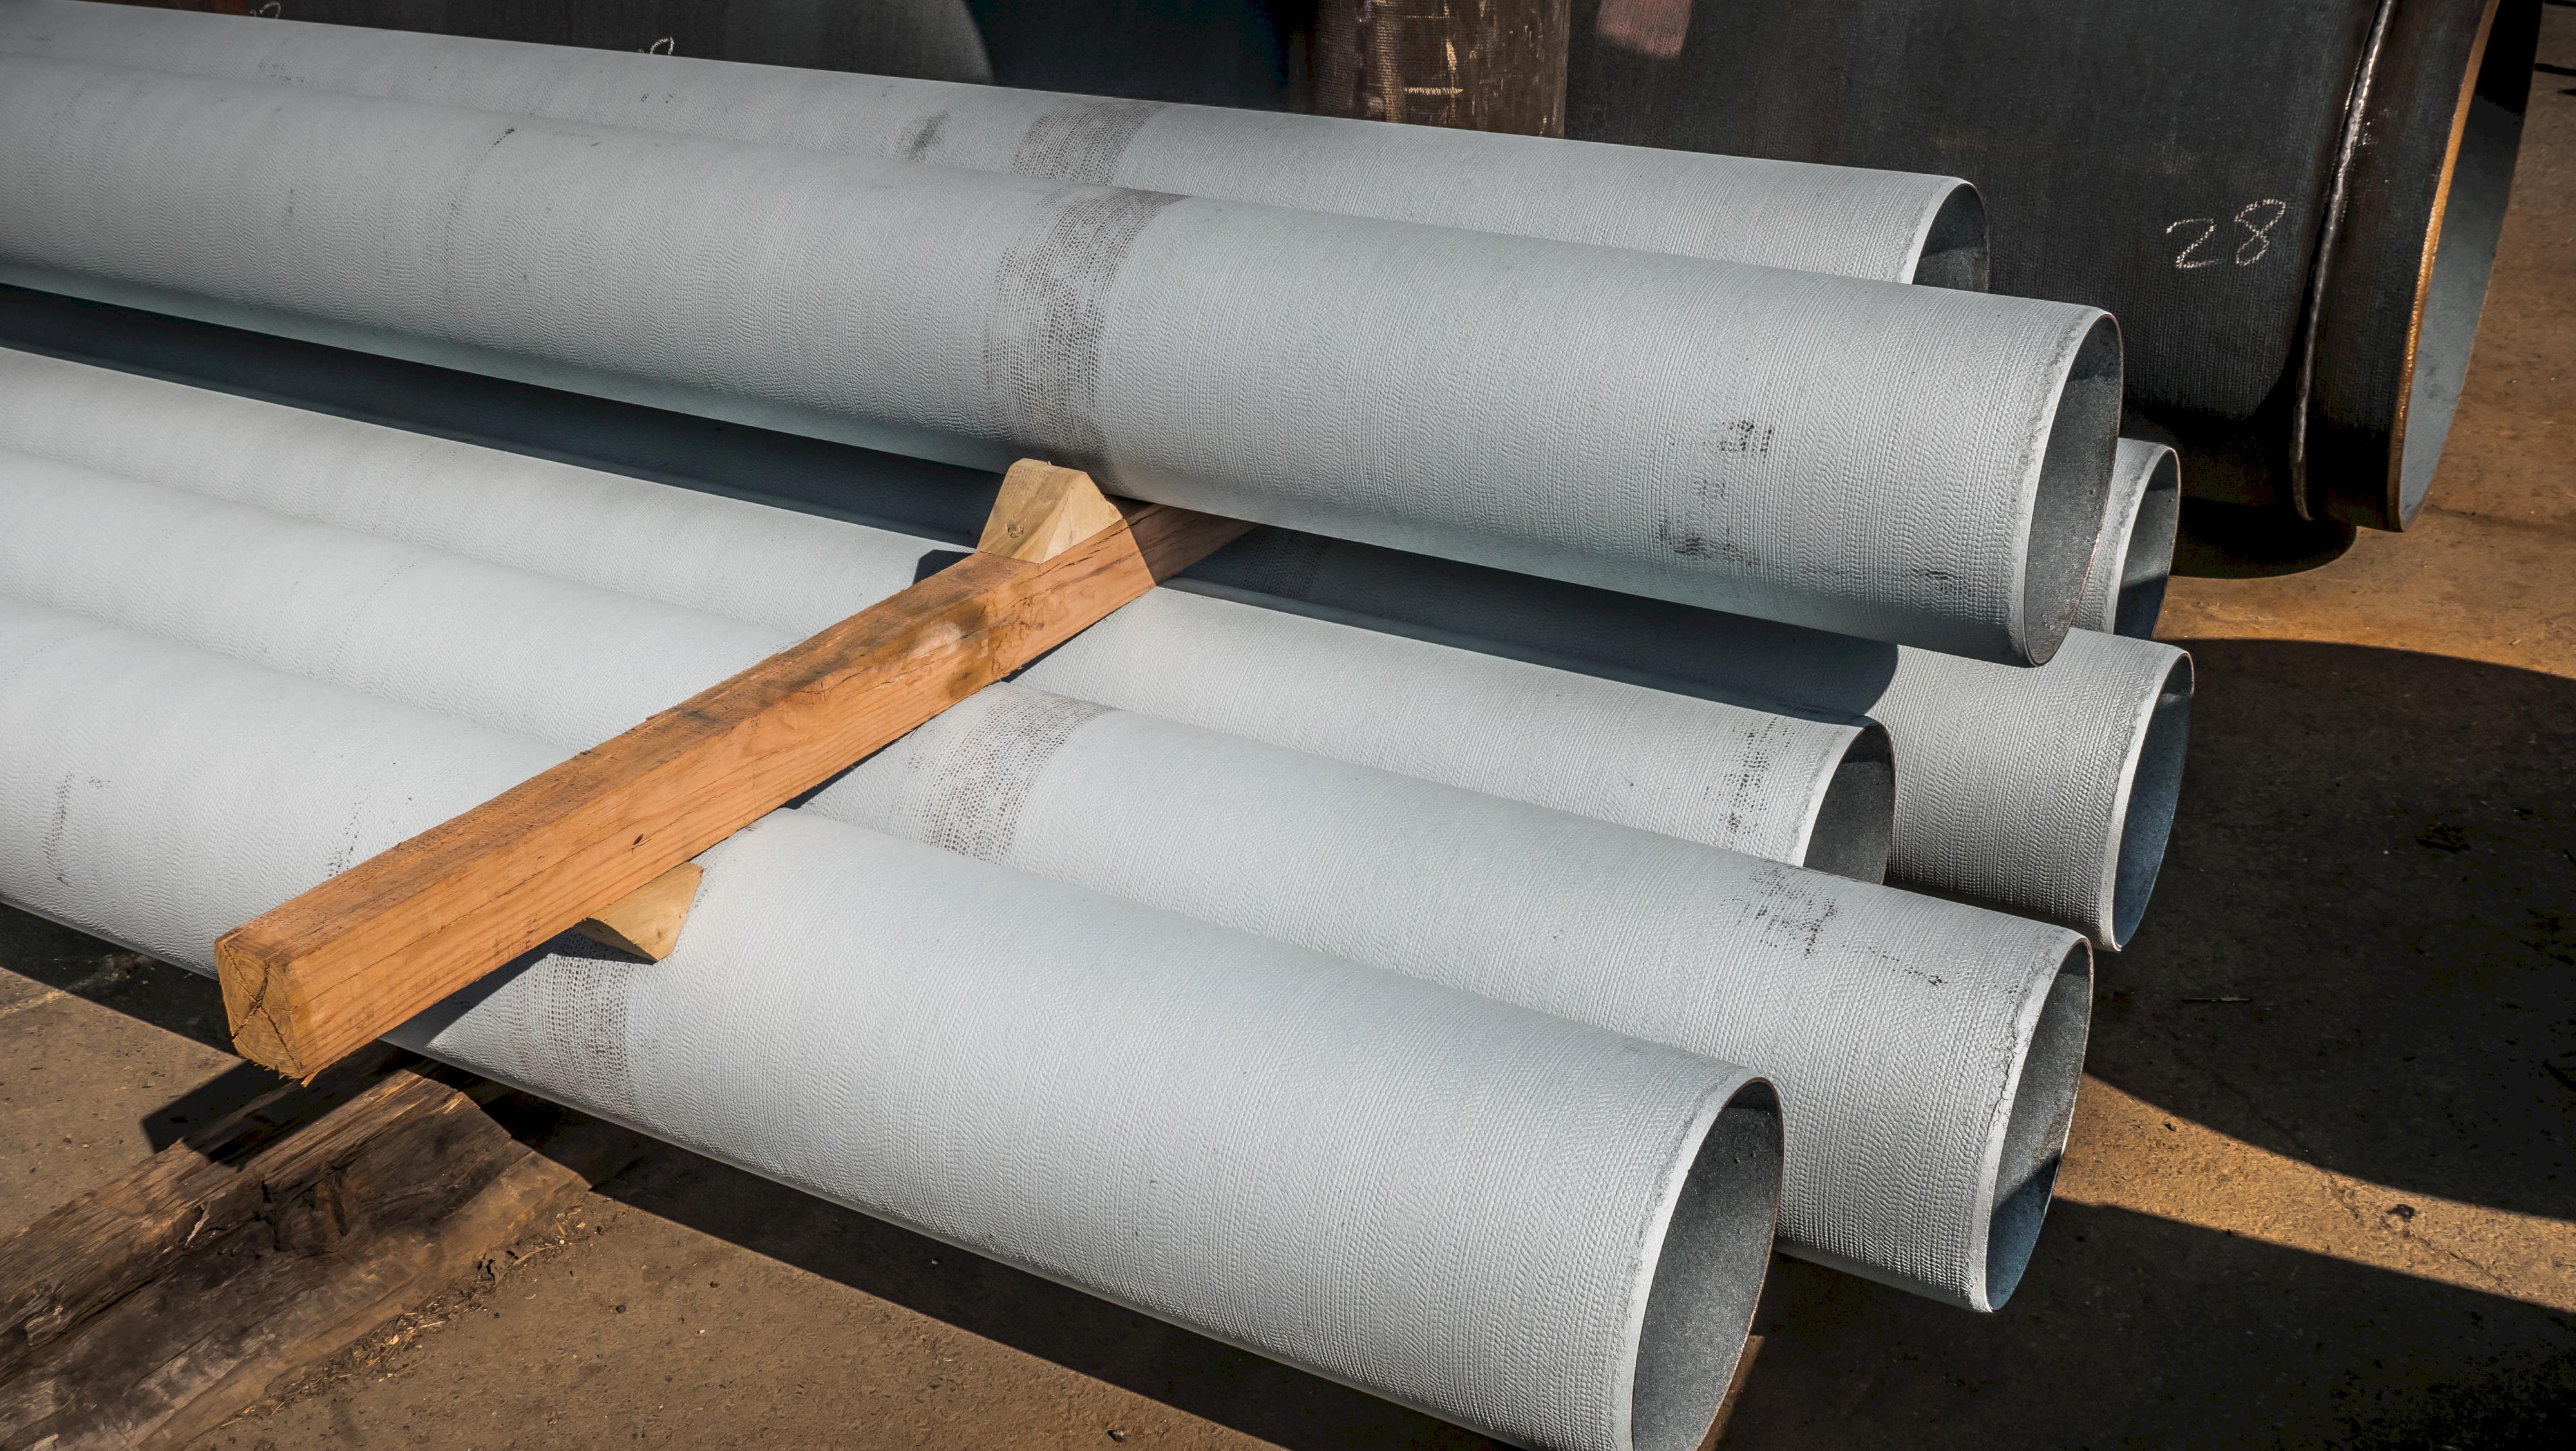 Why Zinc on Ductile Iron Pipe and What&rsquo;s the Hype? - McWane Ductile